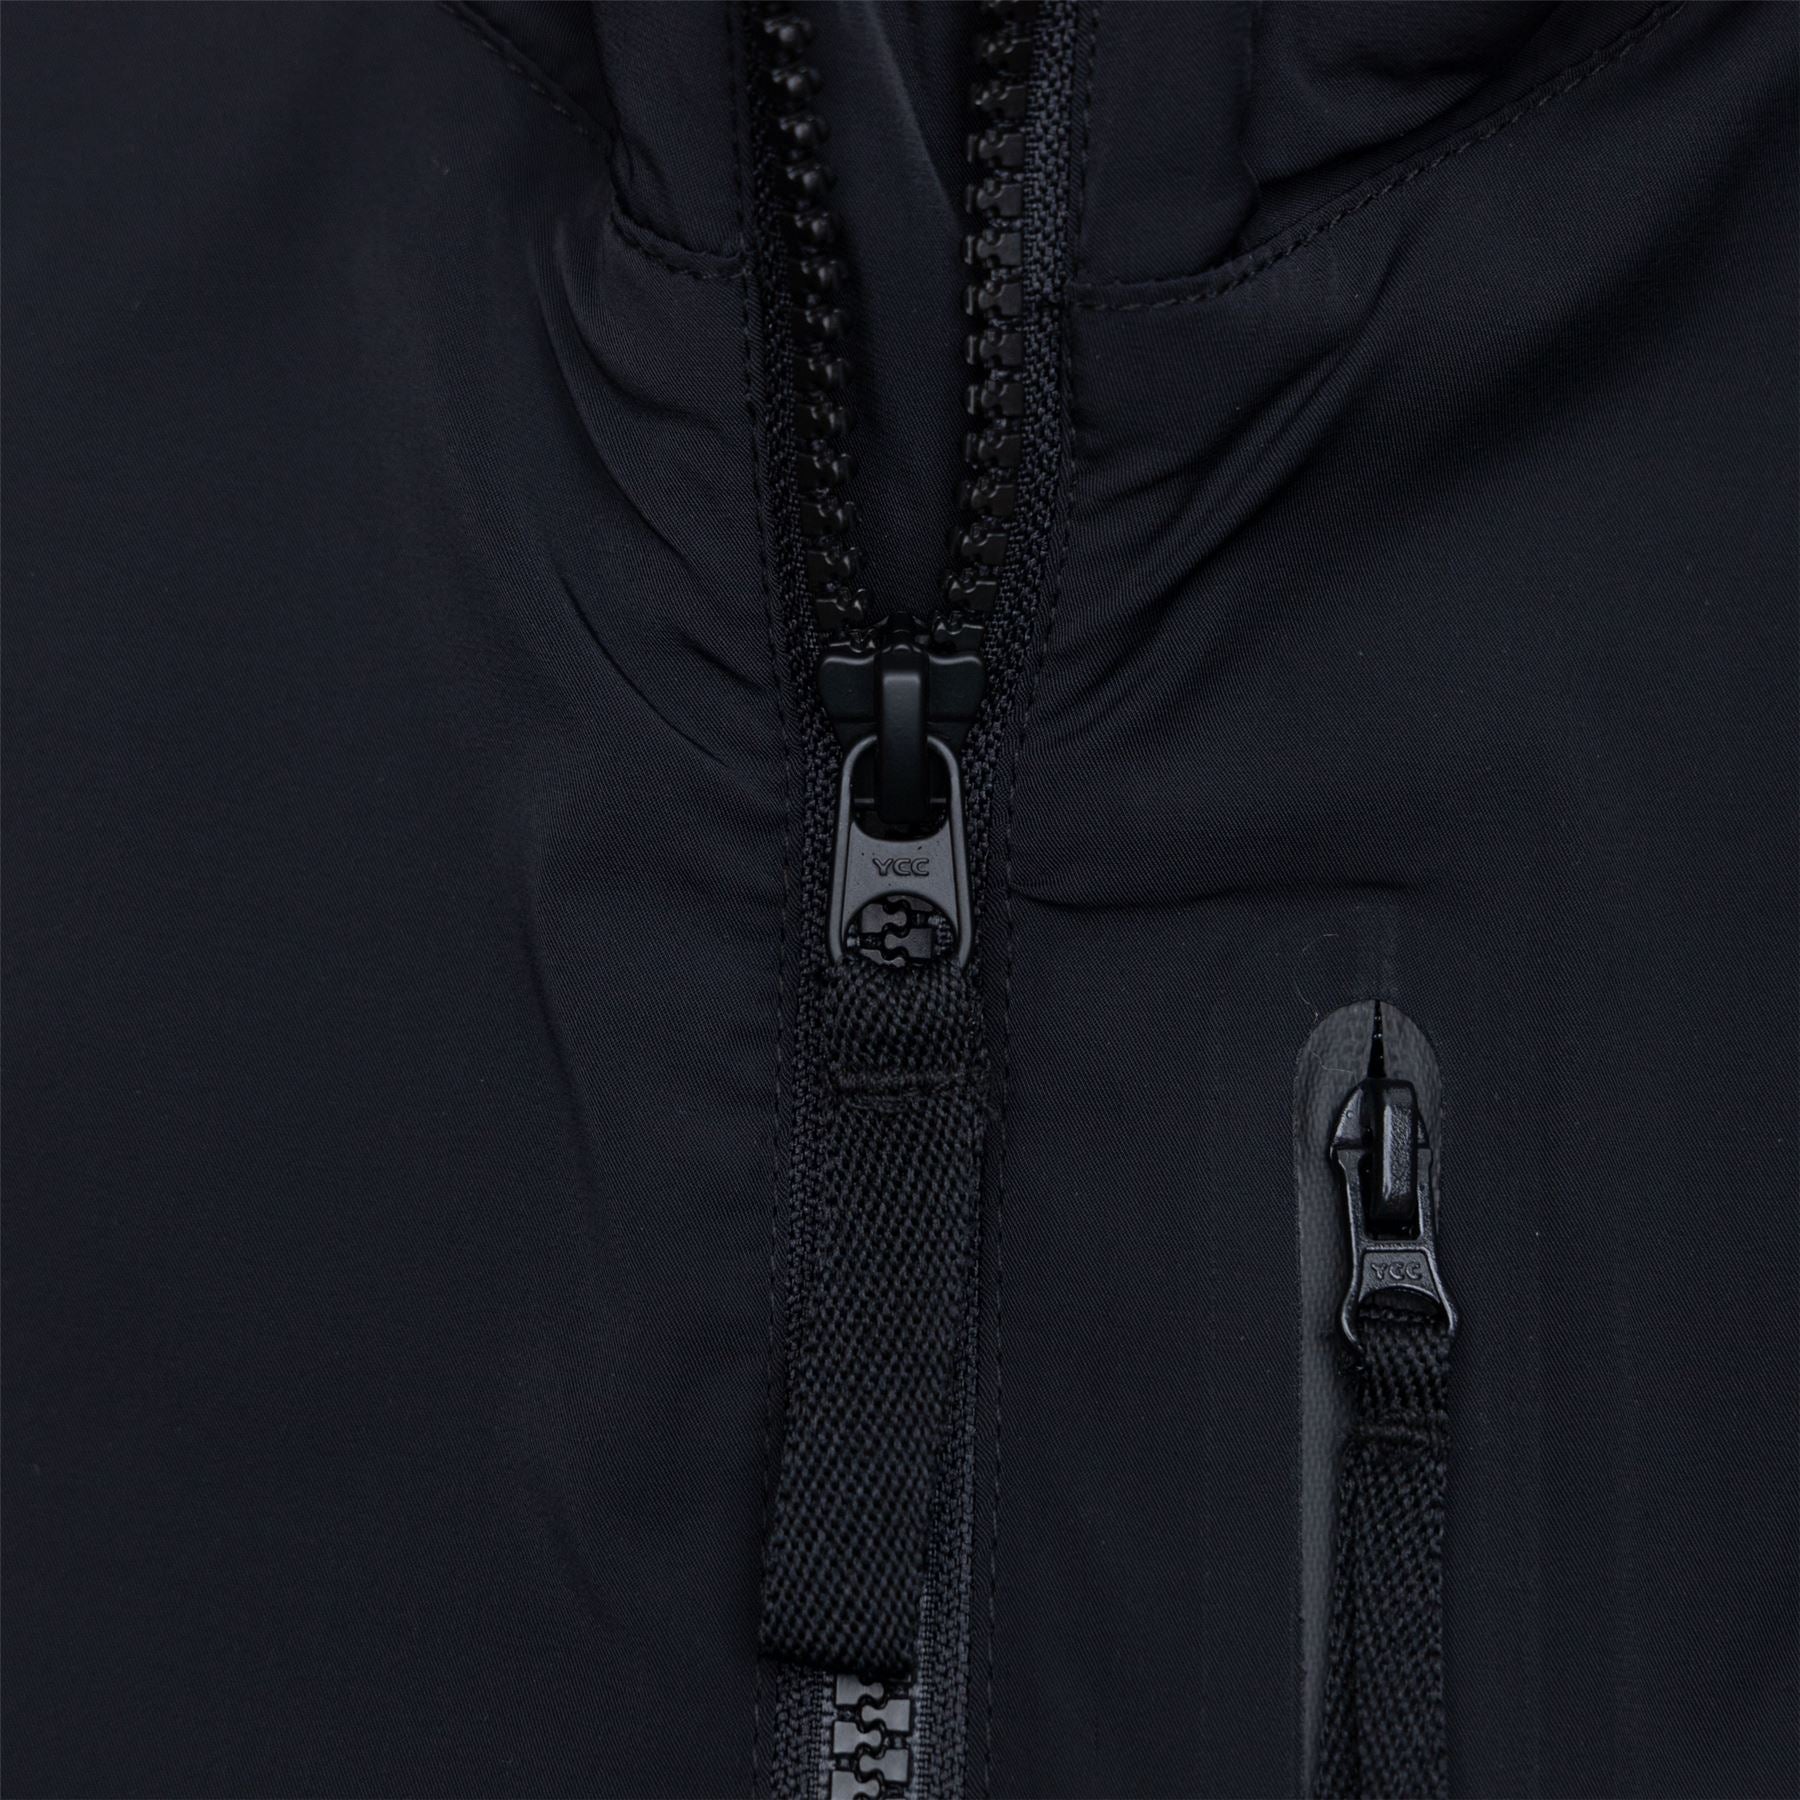 MANORS GOLF - Insulated Course Gilet  HBX - Globally Curated Fashion and  Lifestyle by Hypebeast